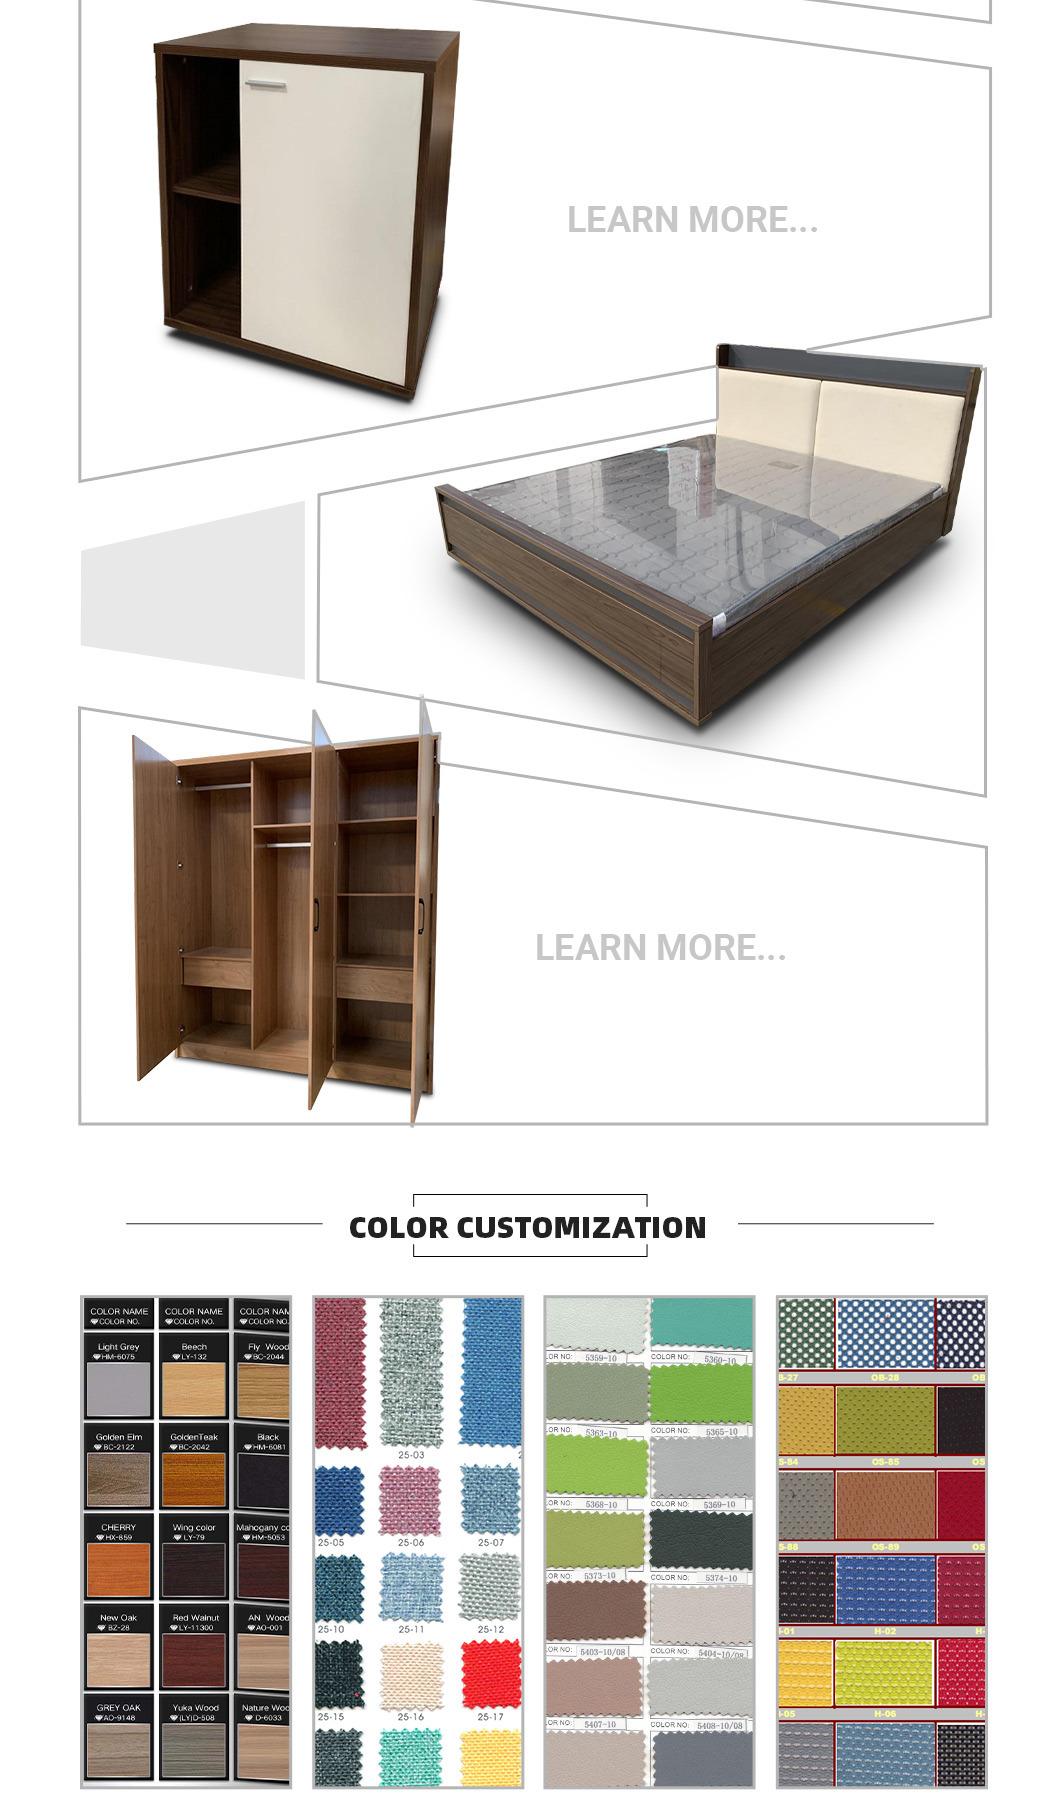 New Arrival Wooden Office Sofa Chair Computer Table Set Filing Cabinet Furniture Office Desk